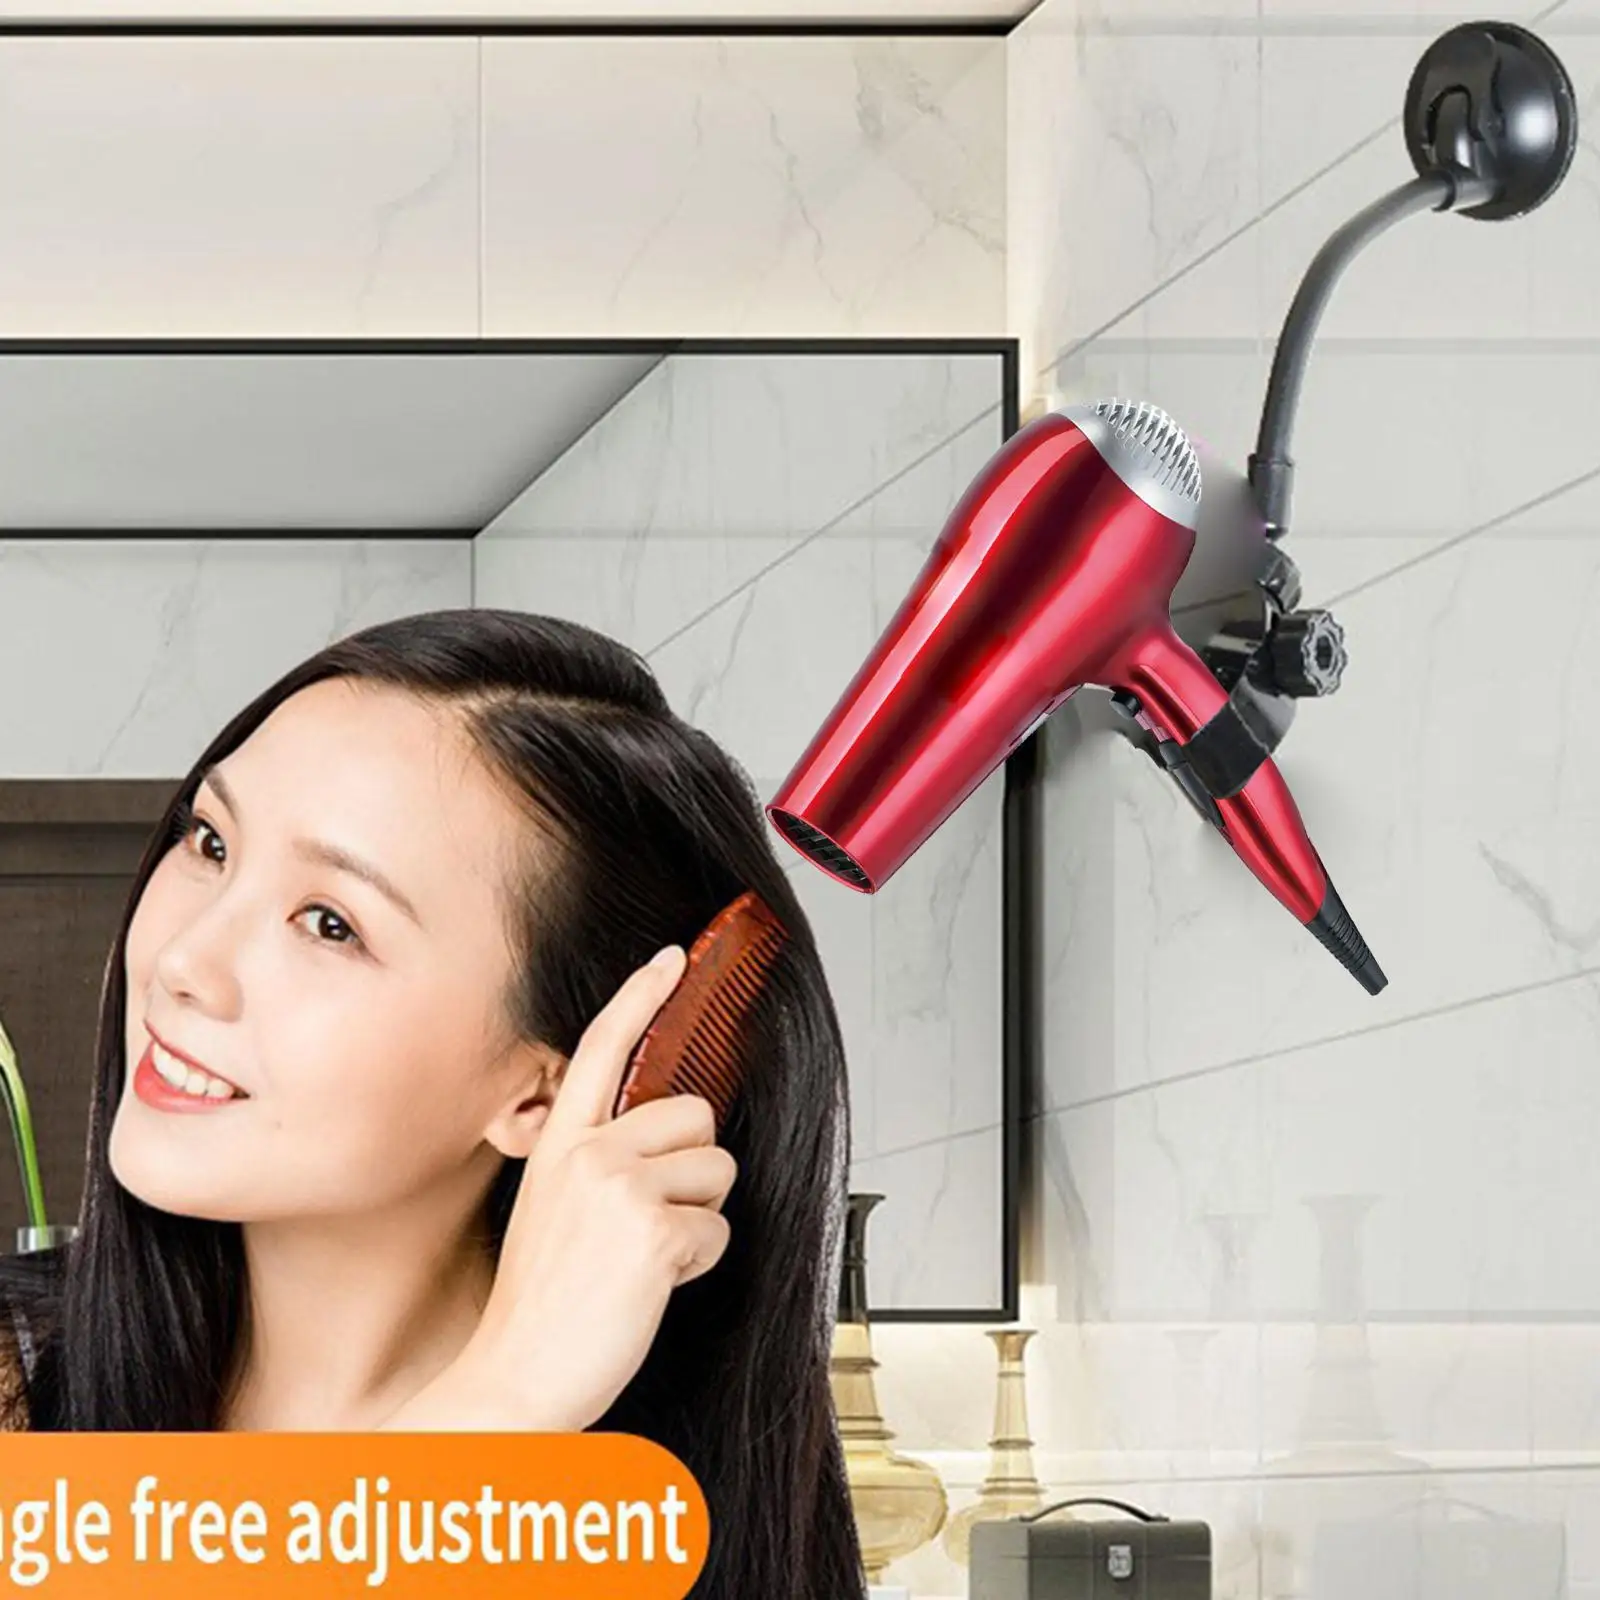 Hair Dryer Holder Suction Cup Rack Hands Free Blow Dryer Stand for Hair Care